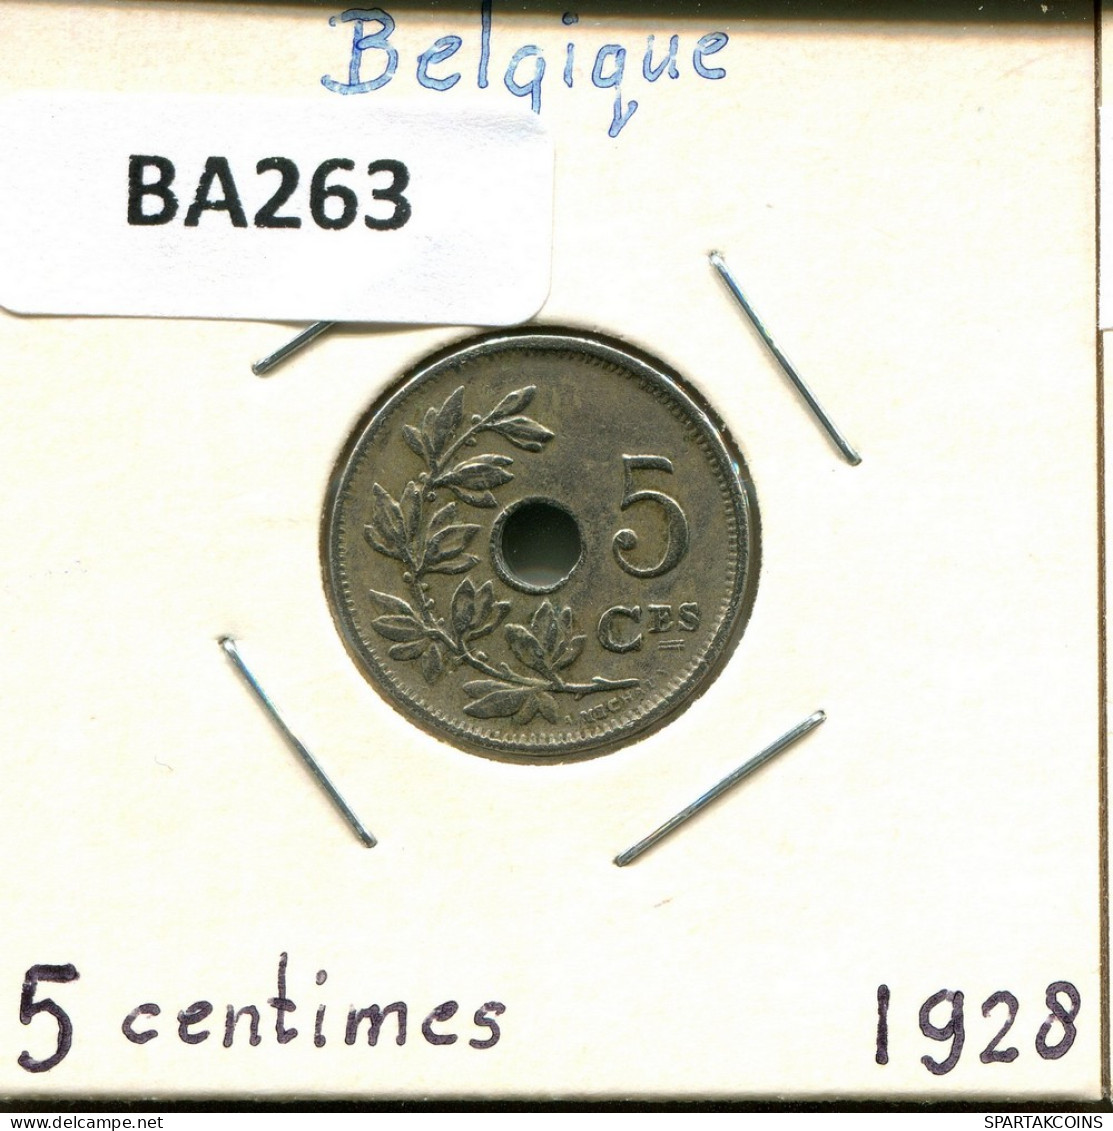 5 CENTIMES 1928 FRENCH Text BELGIUM Coin #BA263.U - 5 Cent